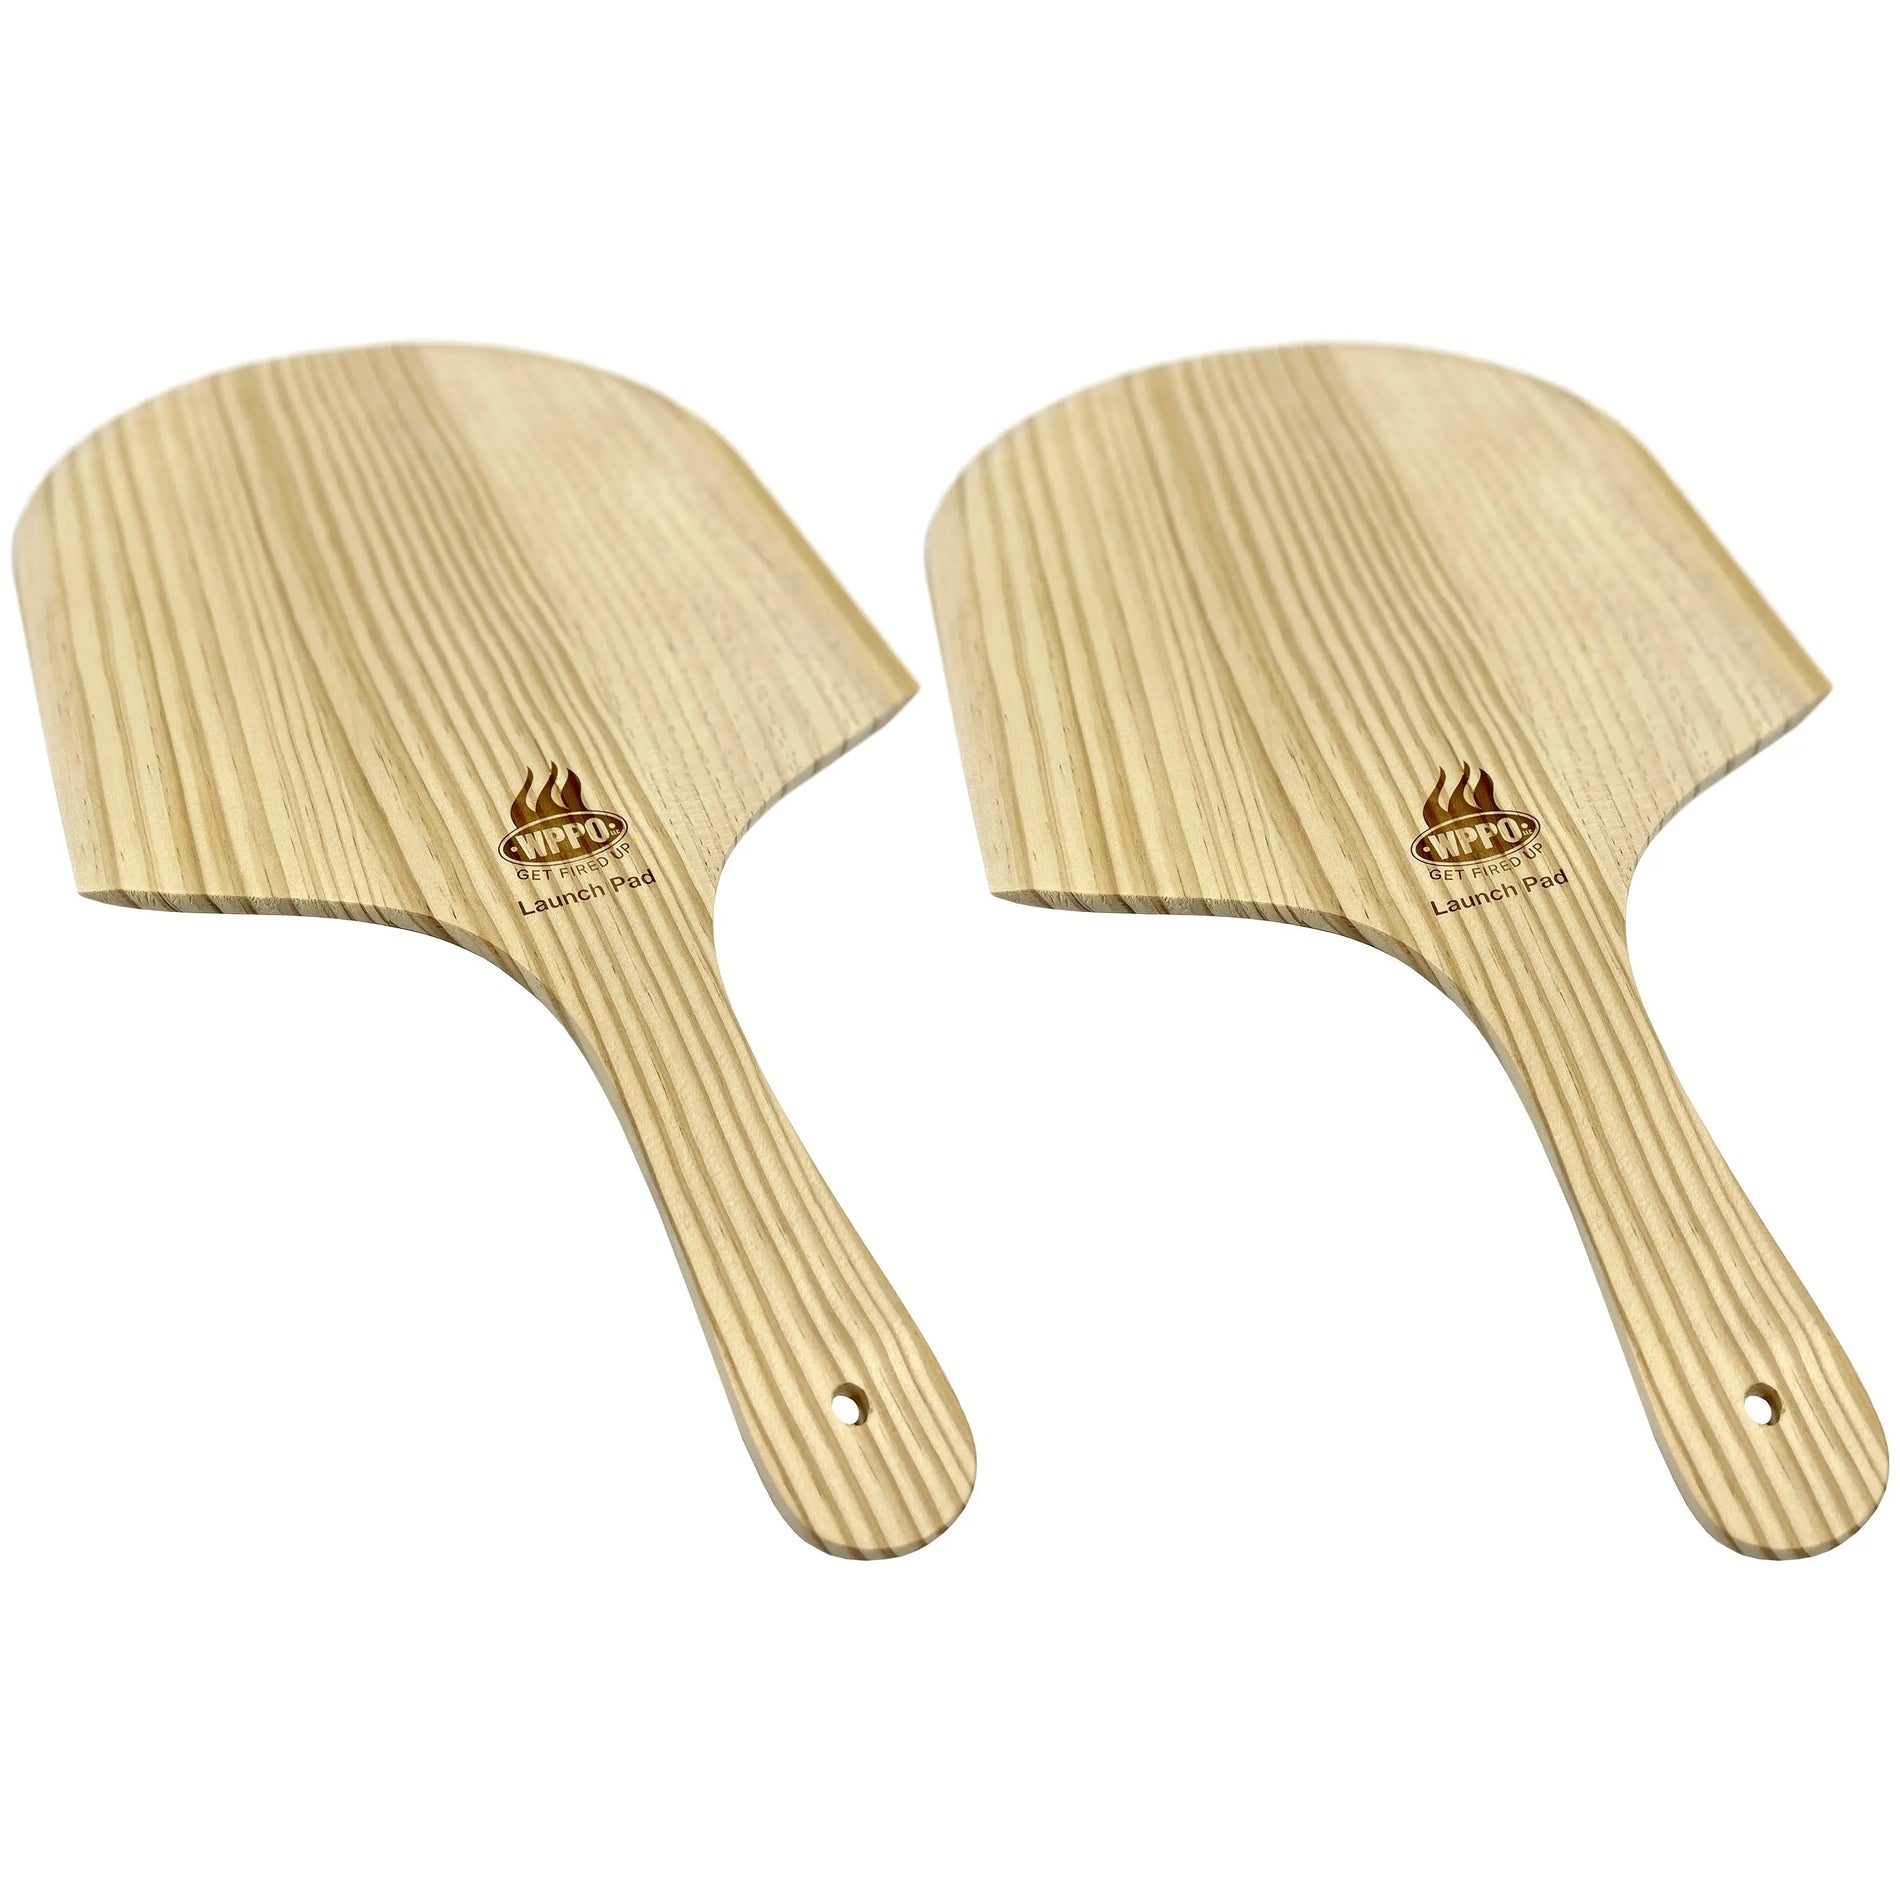 14 Wooden Pizza Launch Peel - 2 pack - Land Supply Canada